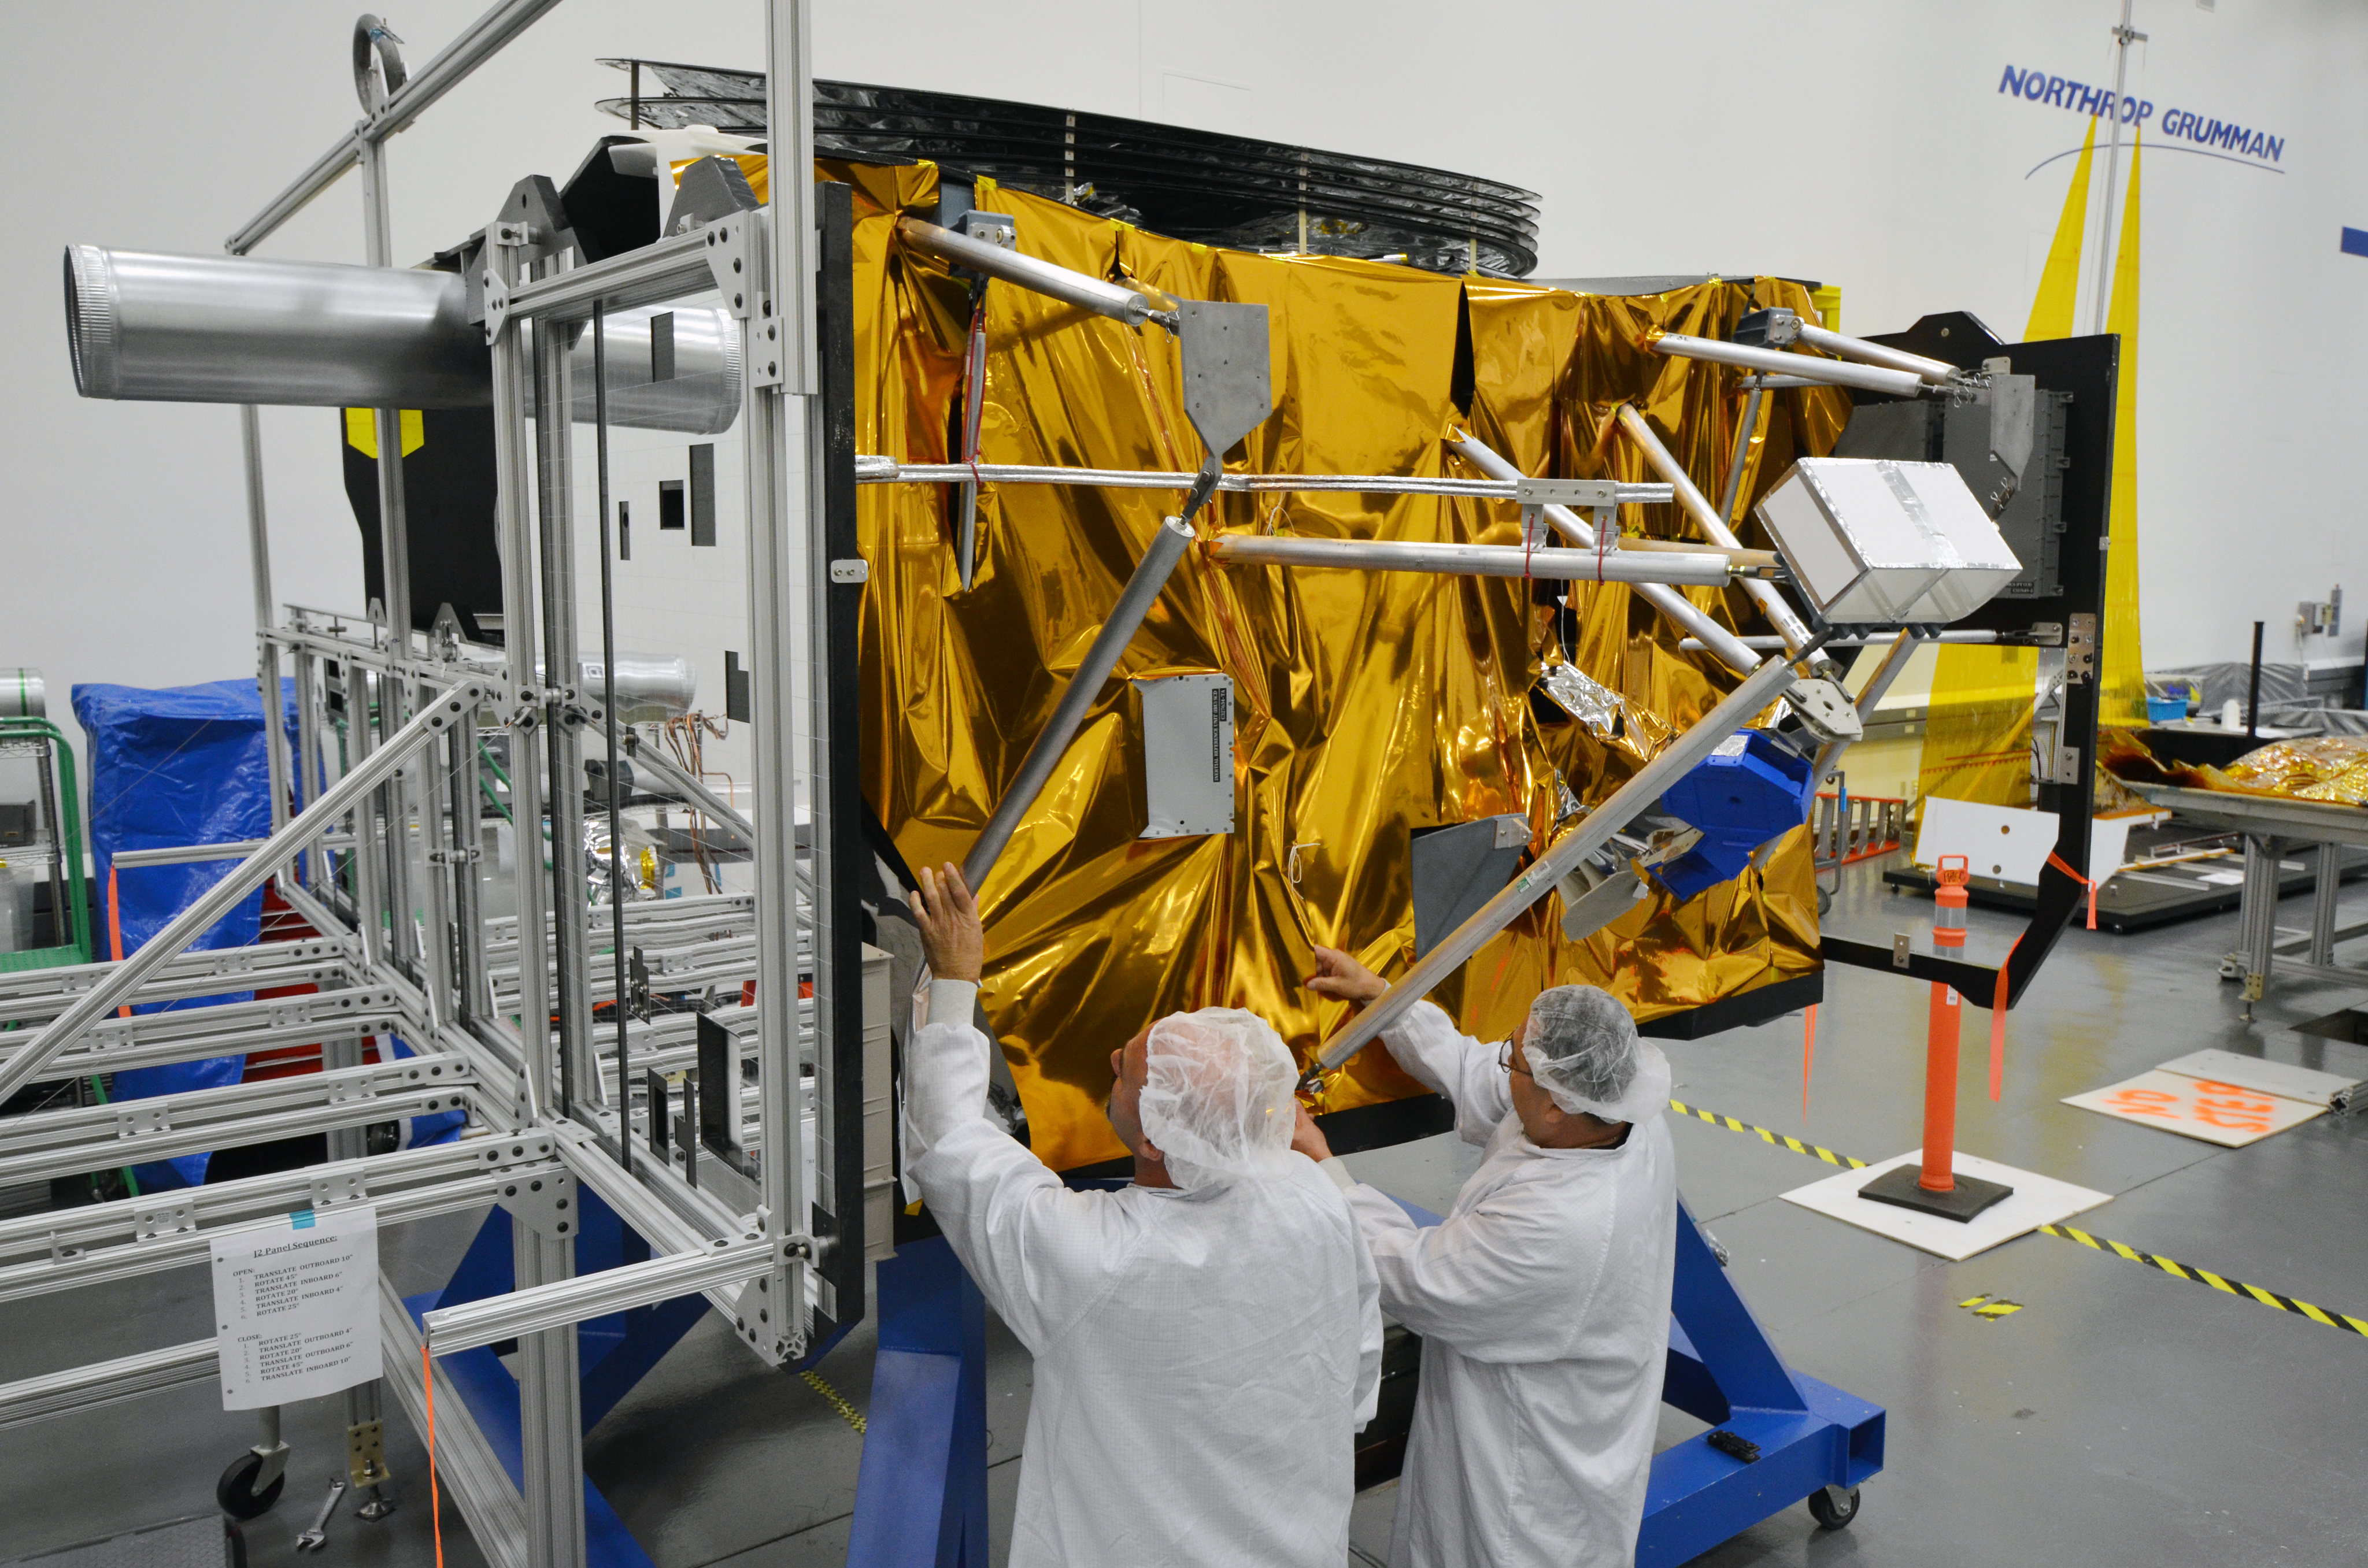 Test technicians work on a mock-up of the James Webb Space Telescope spacecraft bus